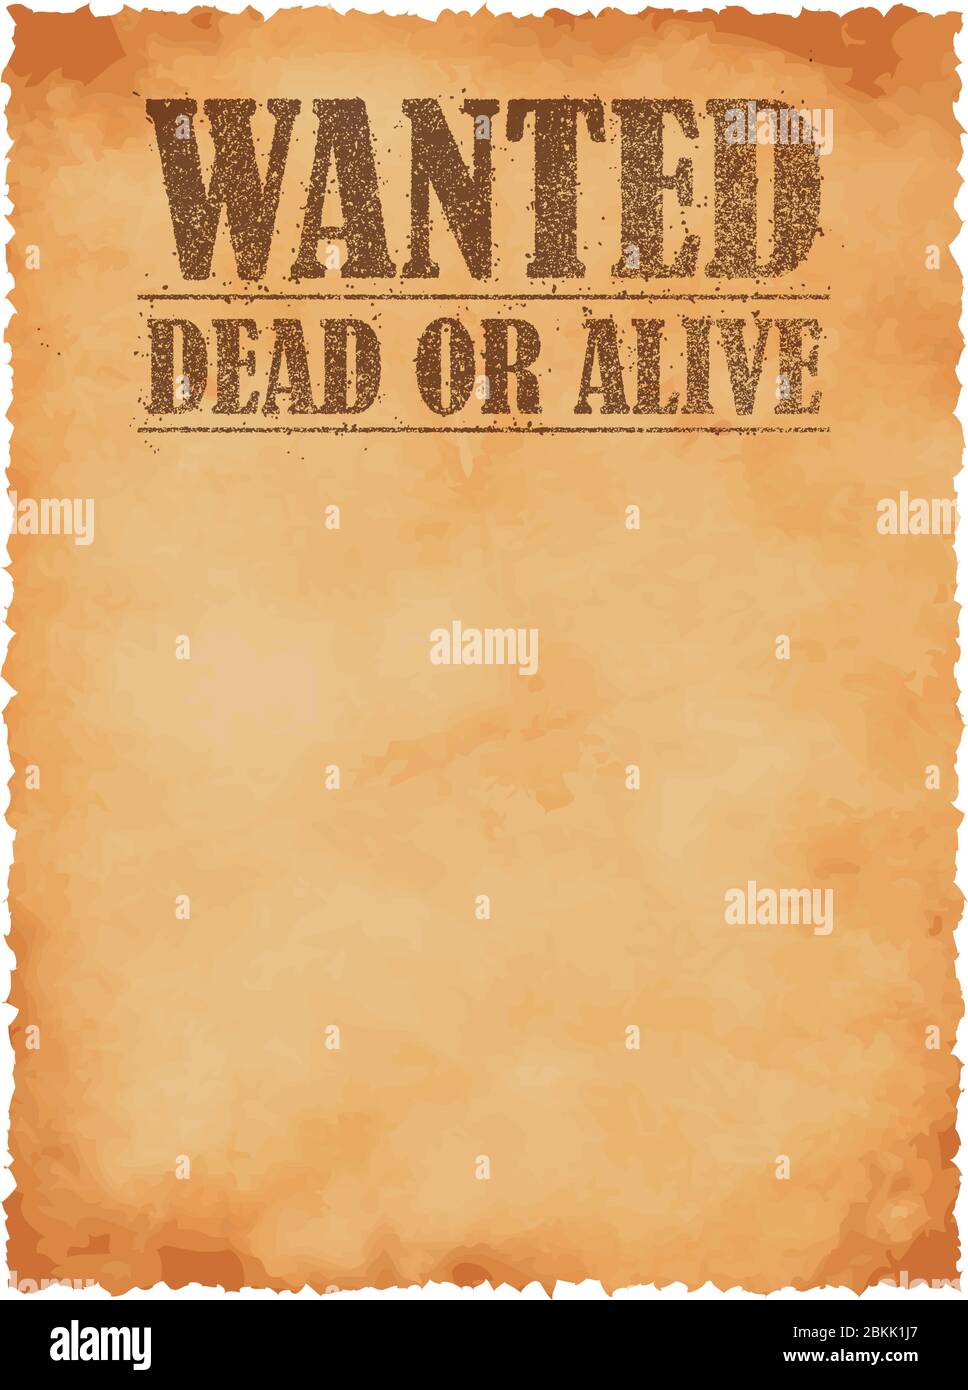 Grunged wanted paper template vector illustration / American Old West. Stock Vector